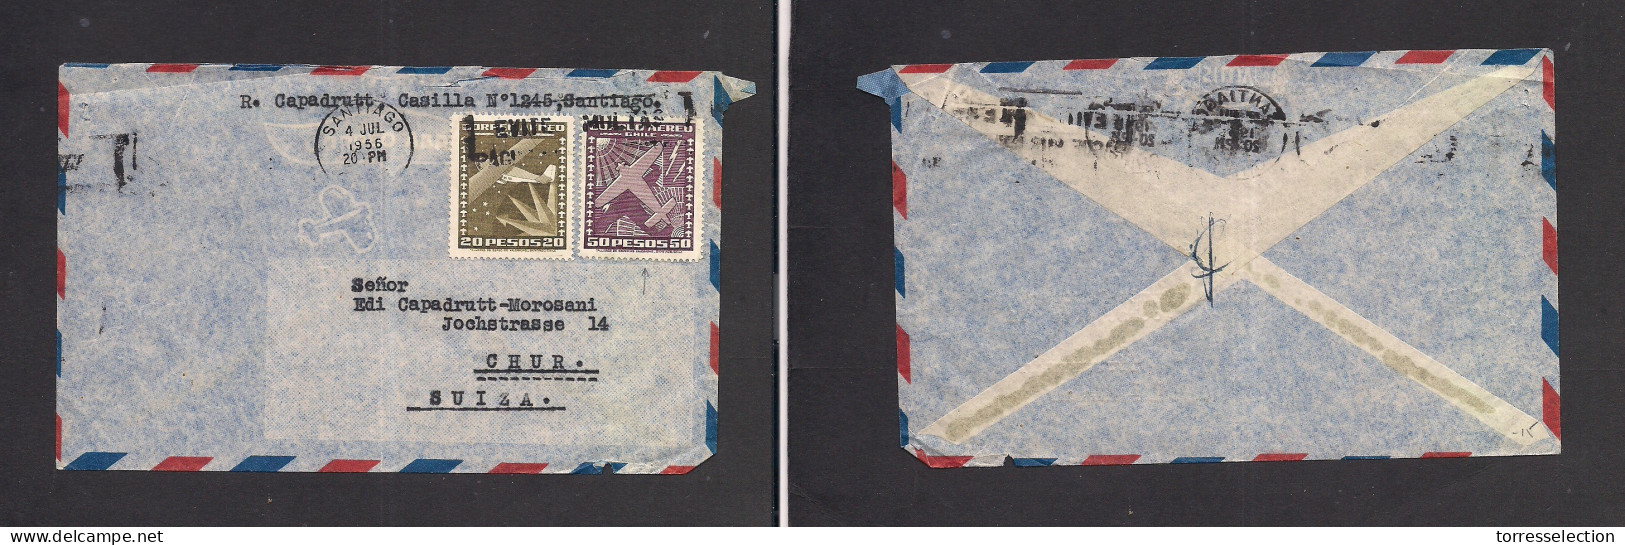 Chile - XX. 1955 (4 July) Santiago - Switzerland, Chur. Air Multifkd Env At 70 Pesos Rate Incl 50p Stamp. Fine. - Chile